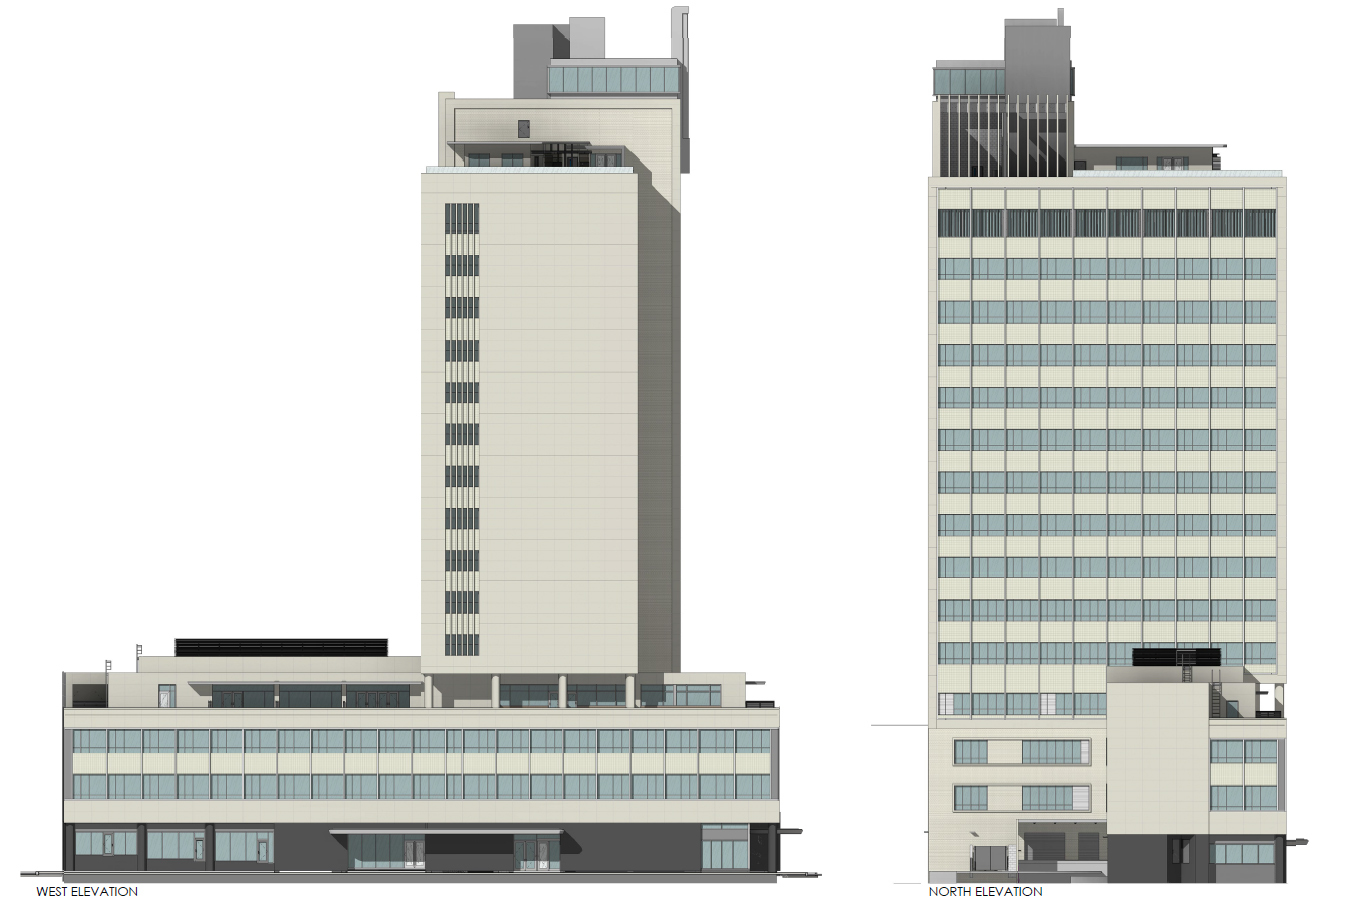 The west and north elevations of the Independent Life Building.